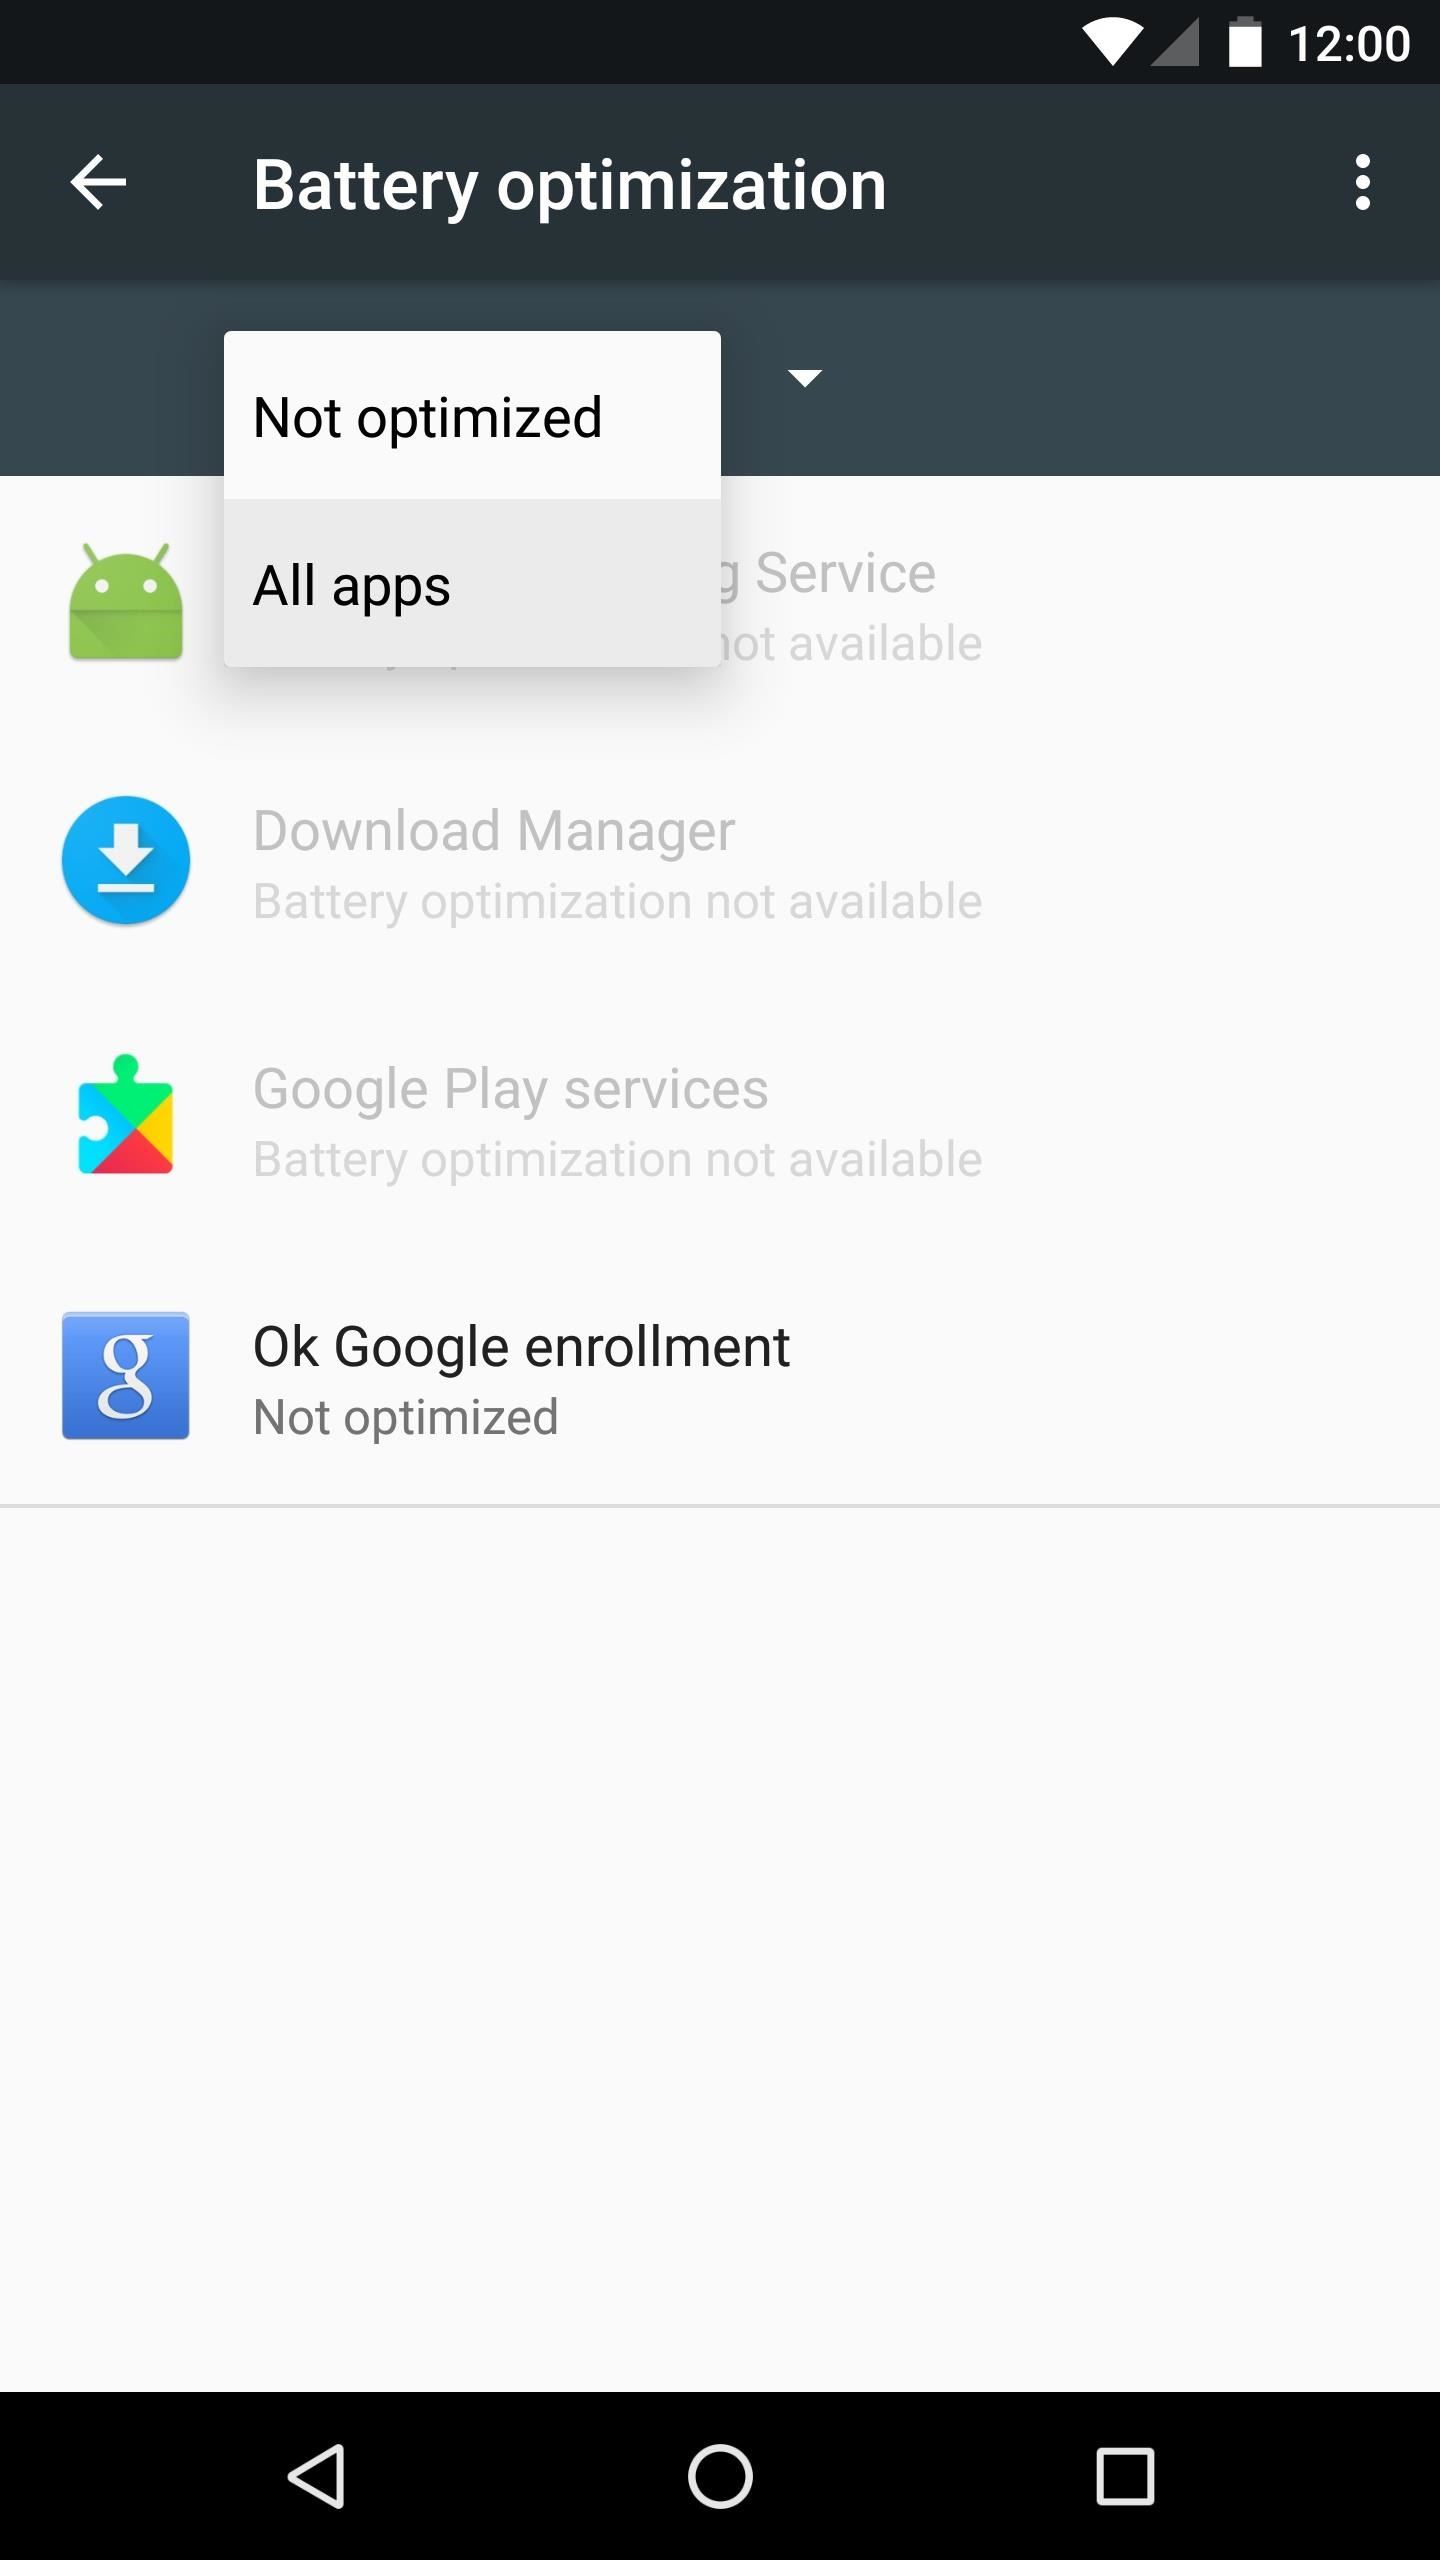 Earn Play Store Credits by Getting Google Opinion Rewards to Give You More Surveys